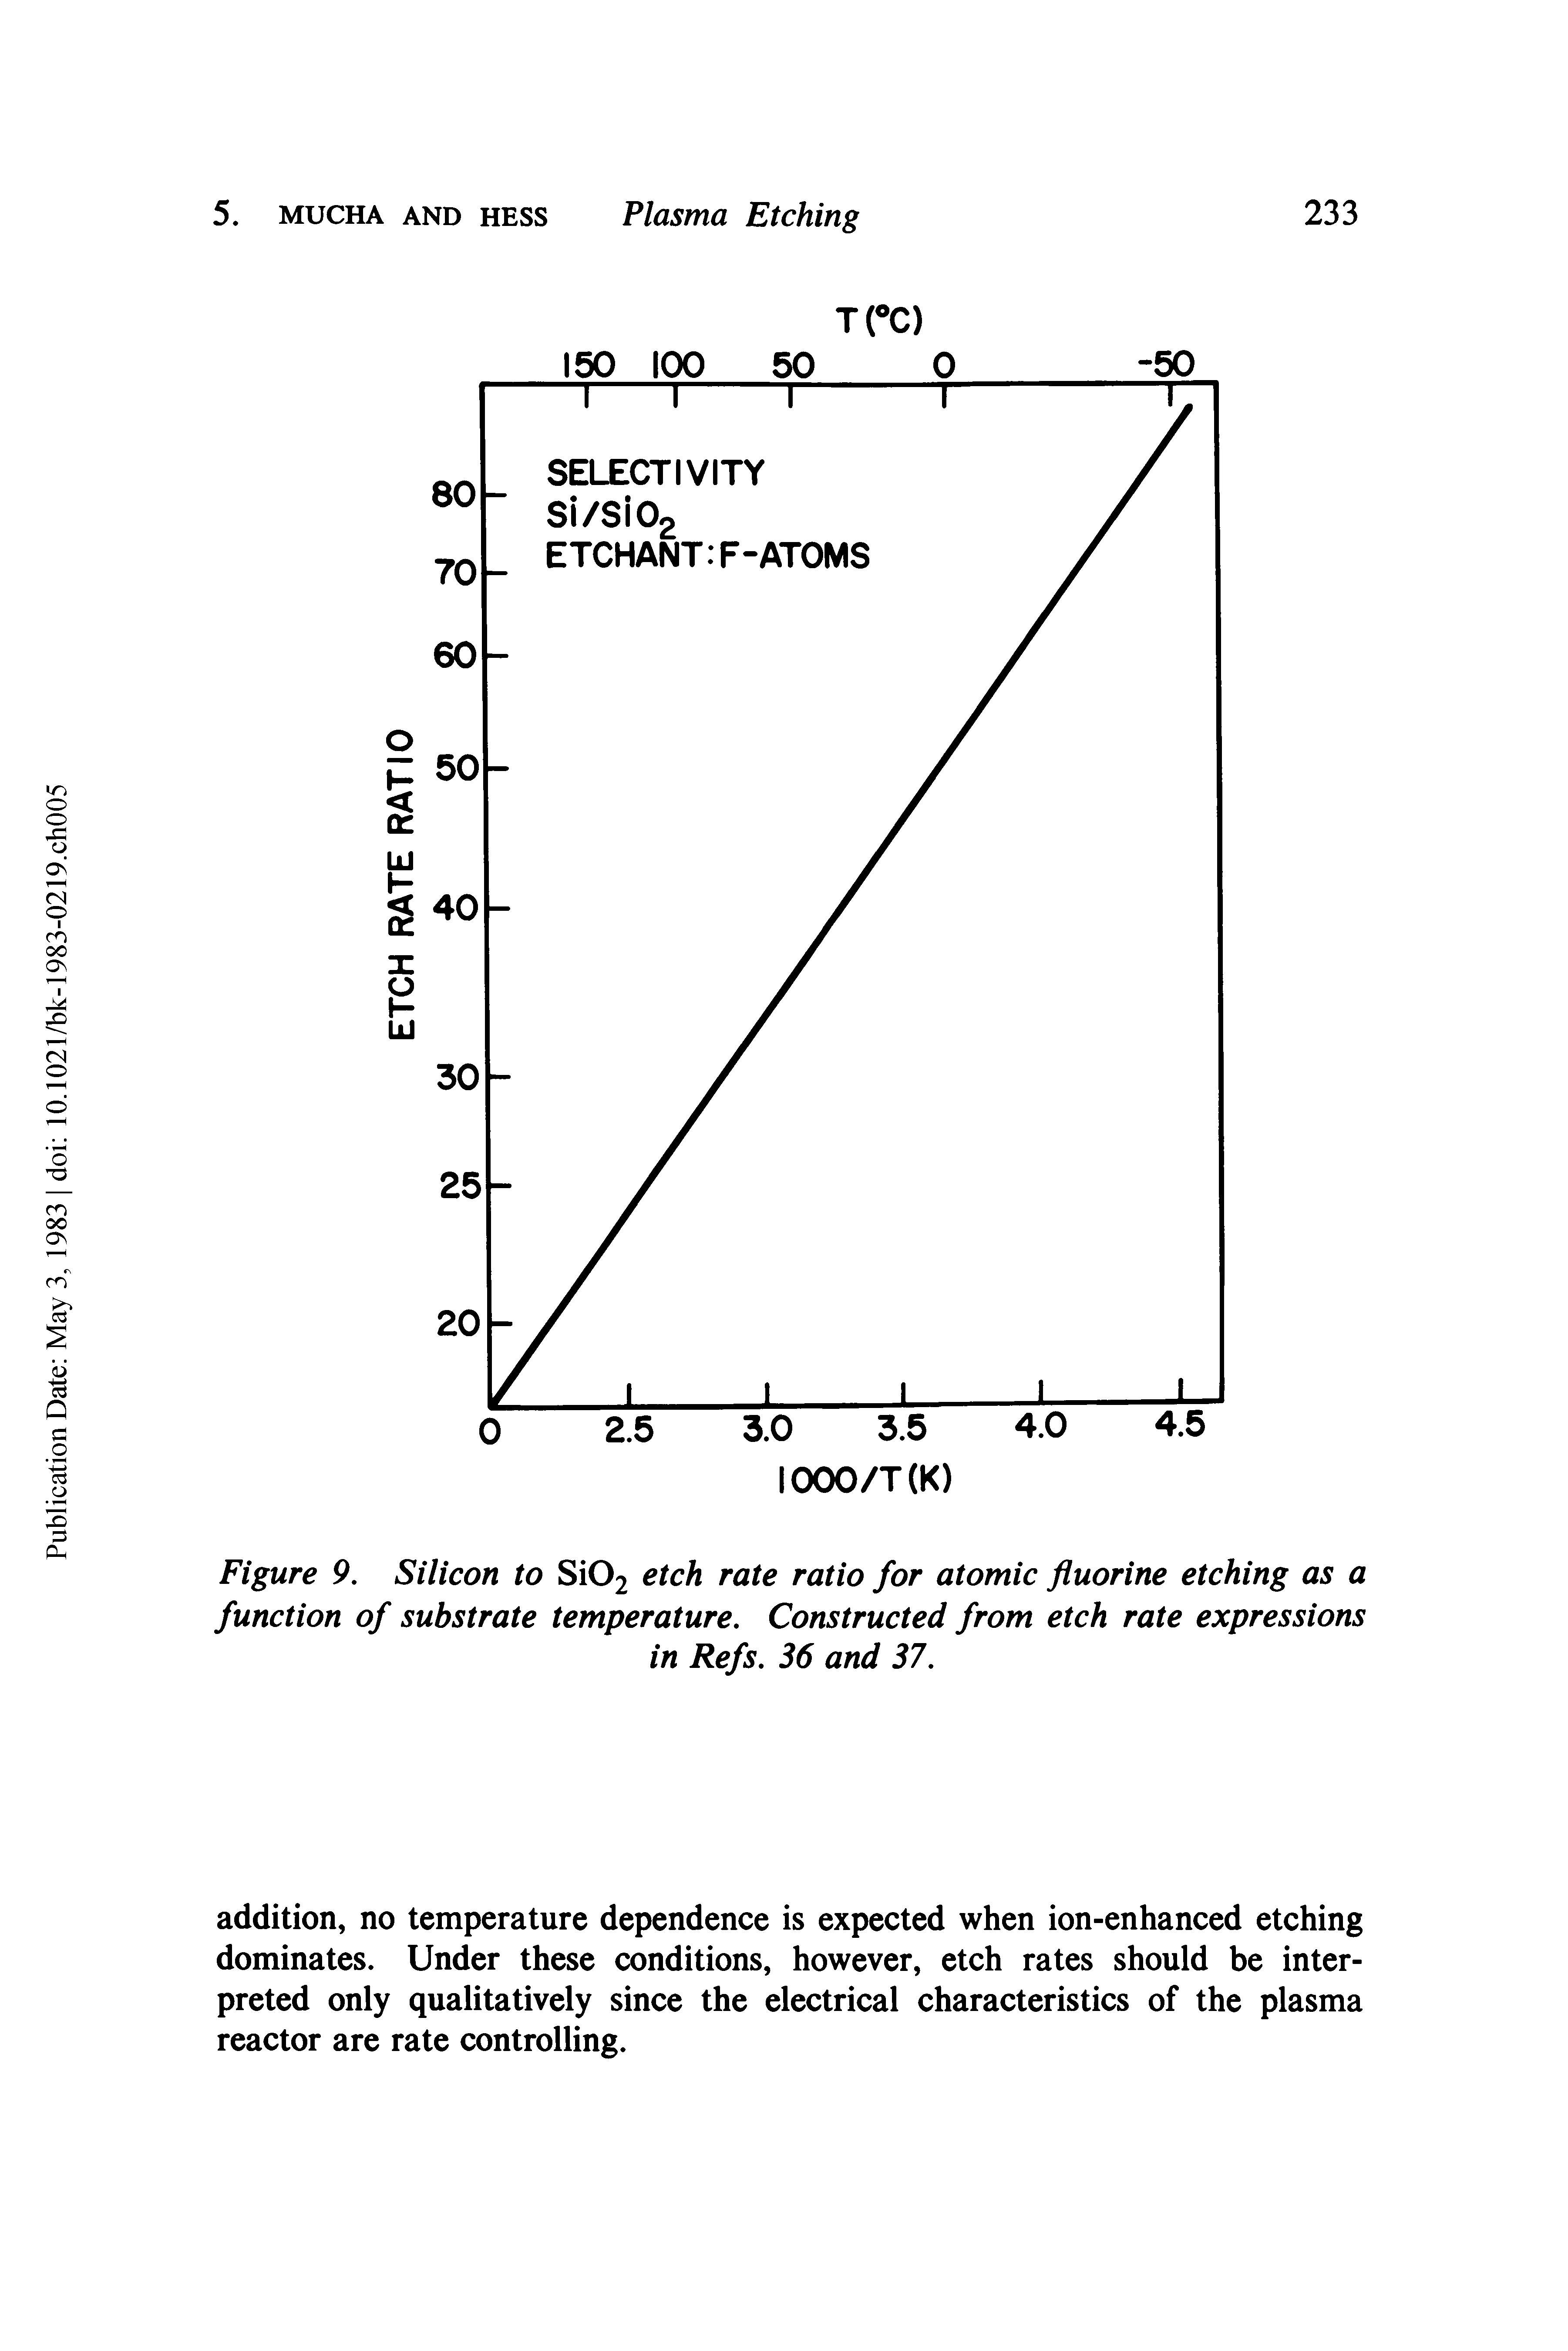 Figure 9. Silicon to Si02 etch rate ratio for atomic fluorine etching as a function of substrate temperature. Constructed from etch rate expressions...